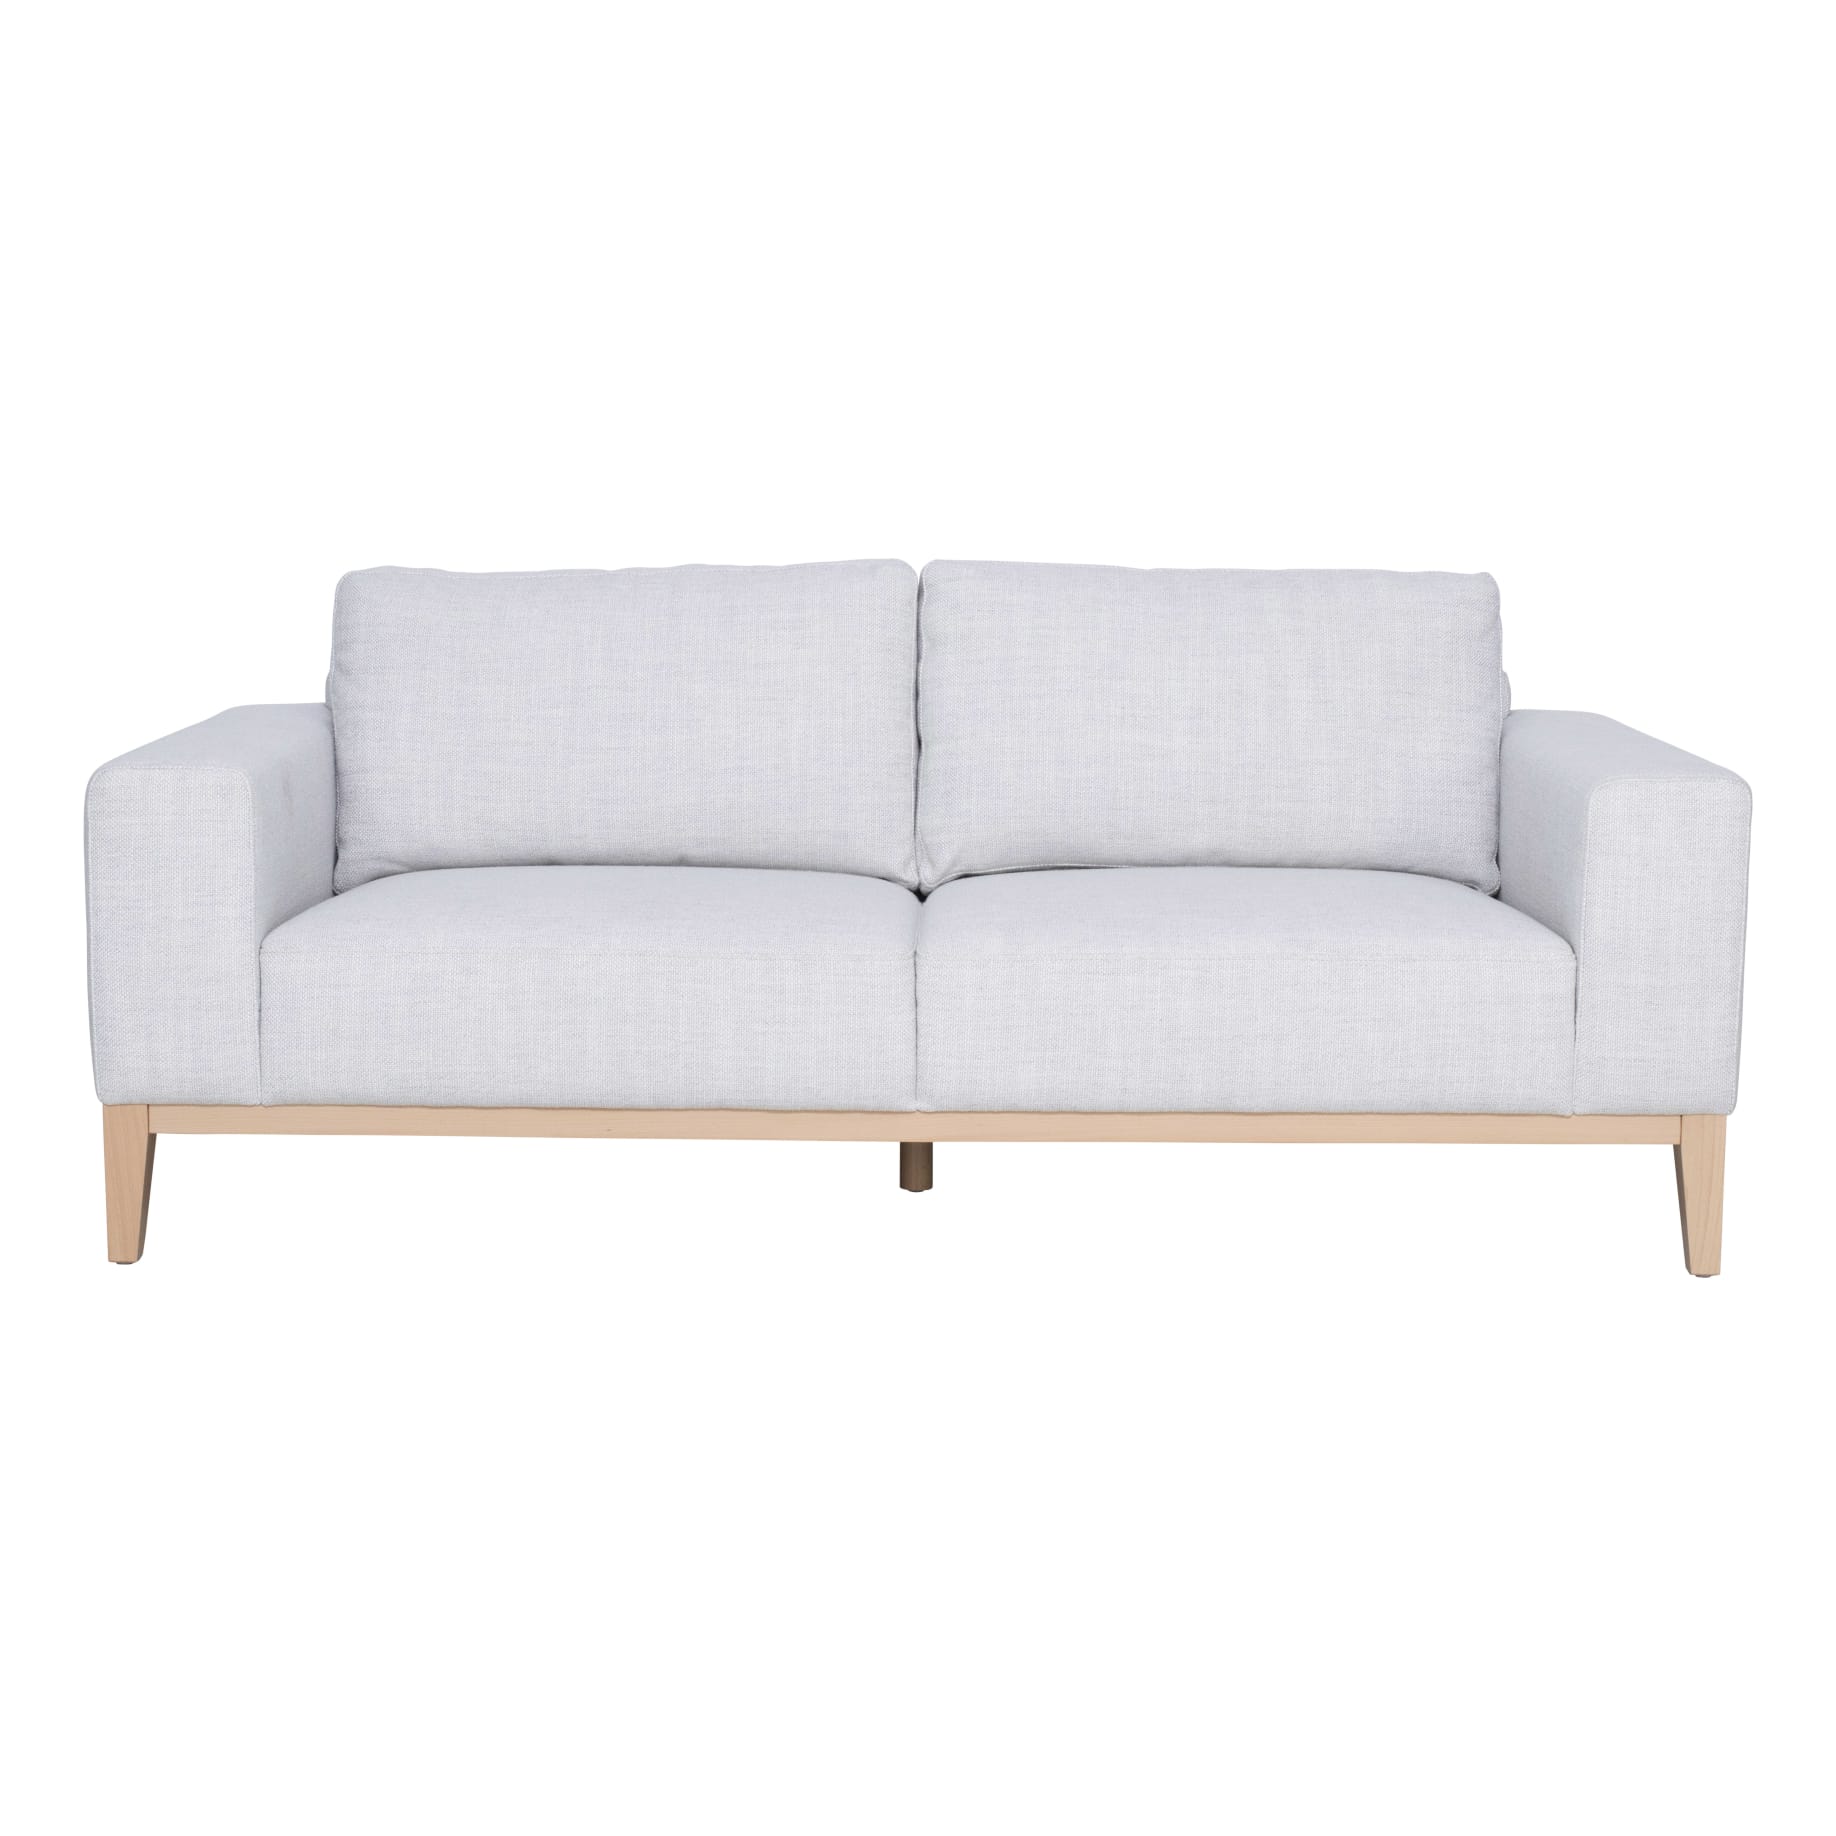 Moana 3 Seater in Kind White